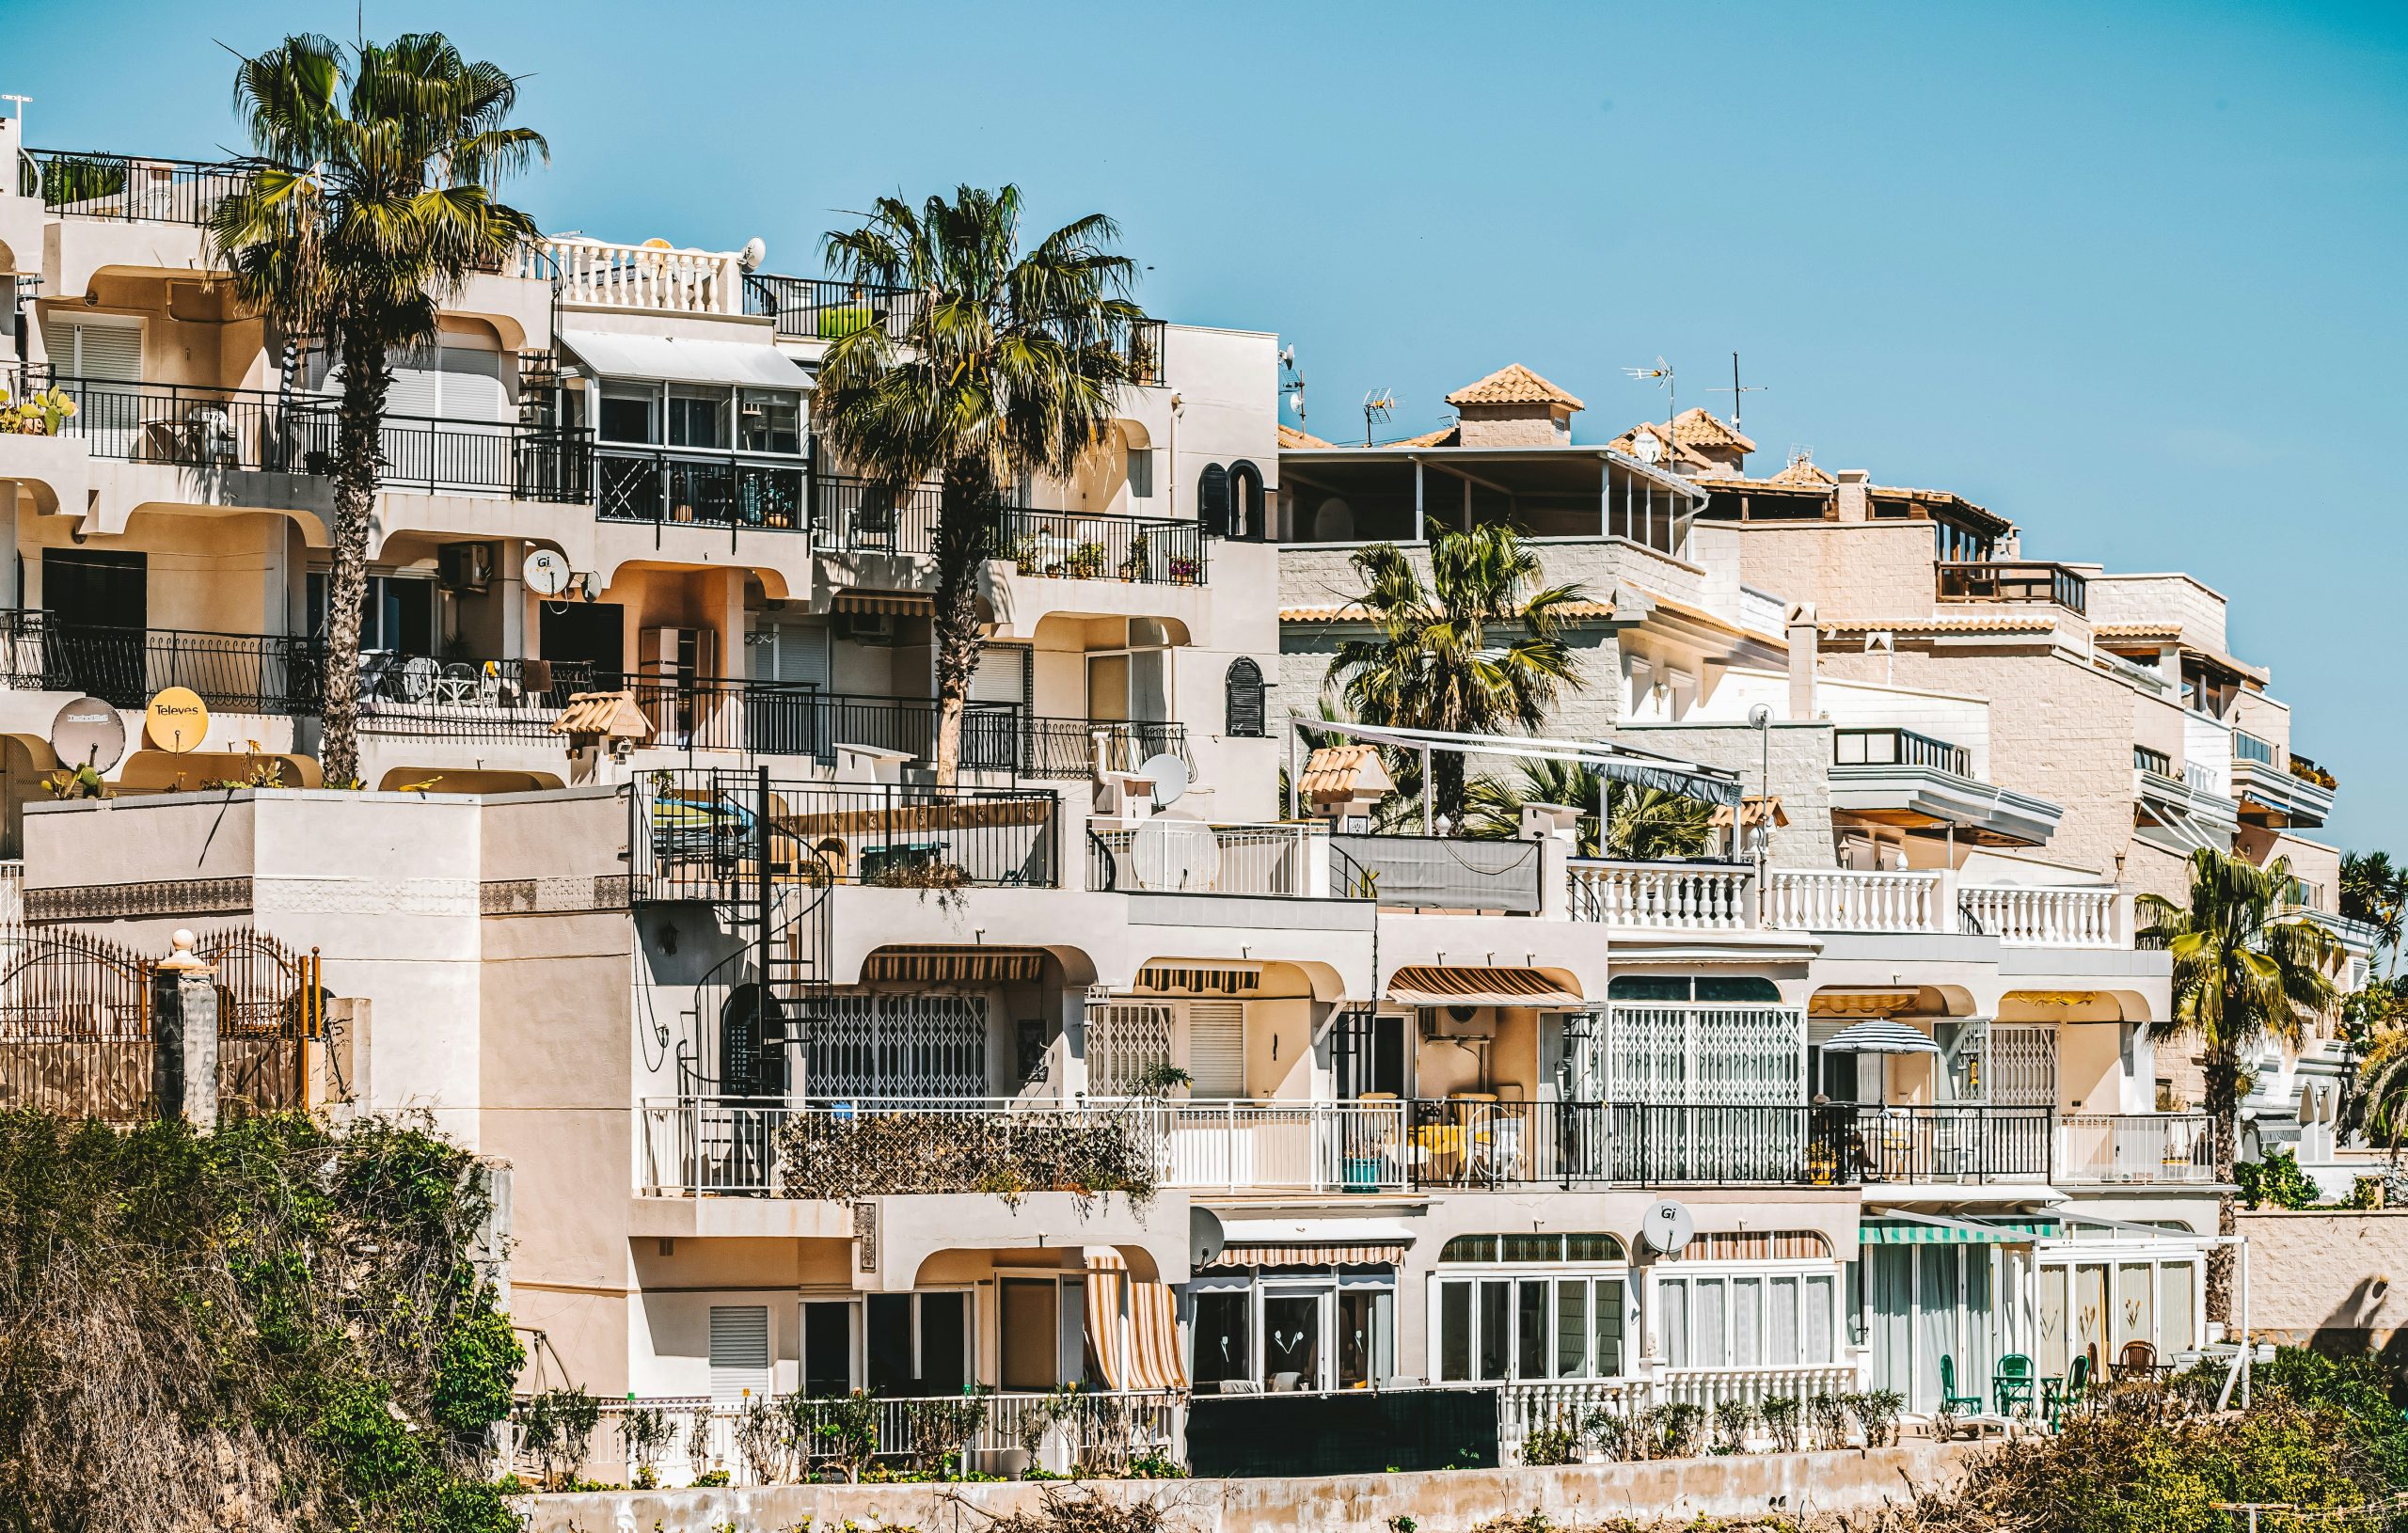 Revealed: How young people in Spain need to save for up to 61 YEARS to afford a 100m2 flat